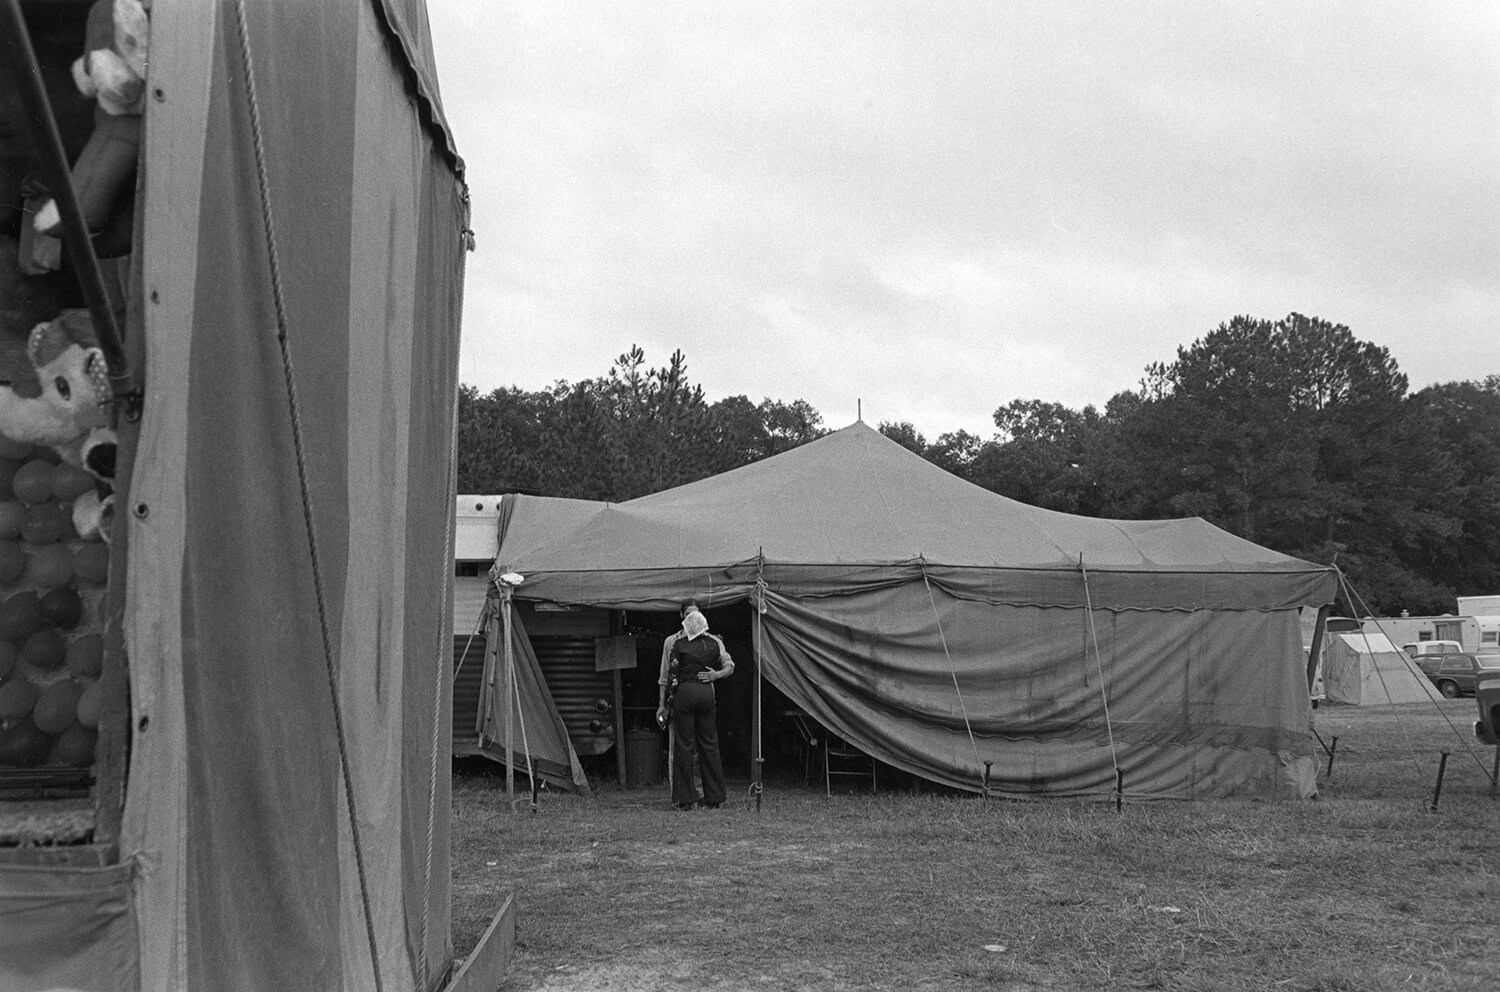   Decatur County Fair , 1977 Silver Gelatin Print 11 x 14 in. (paper size) The Do Good Fund, Inc., 2017-055 